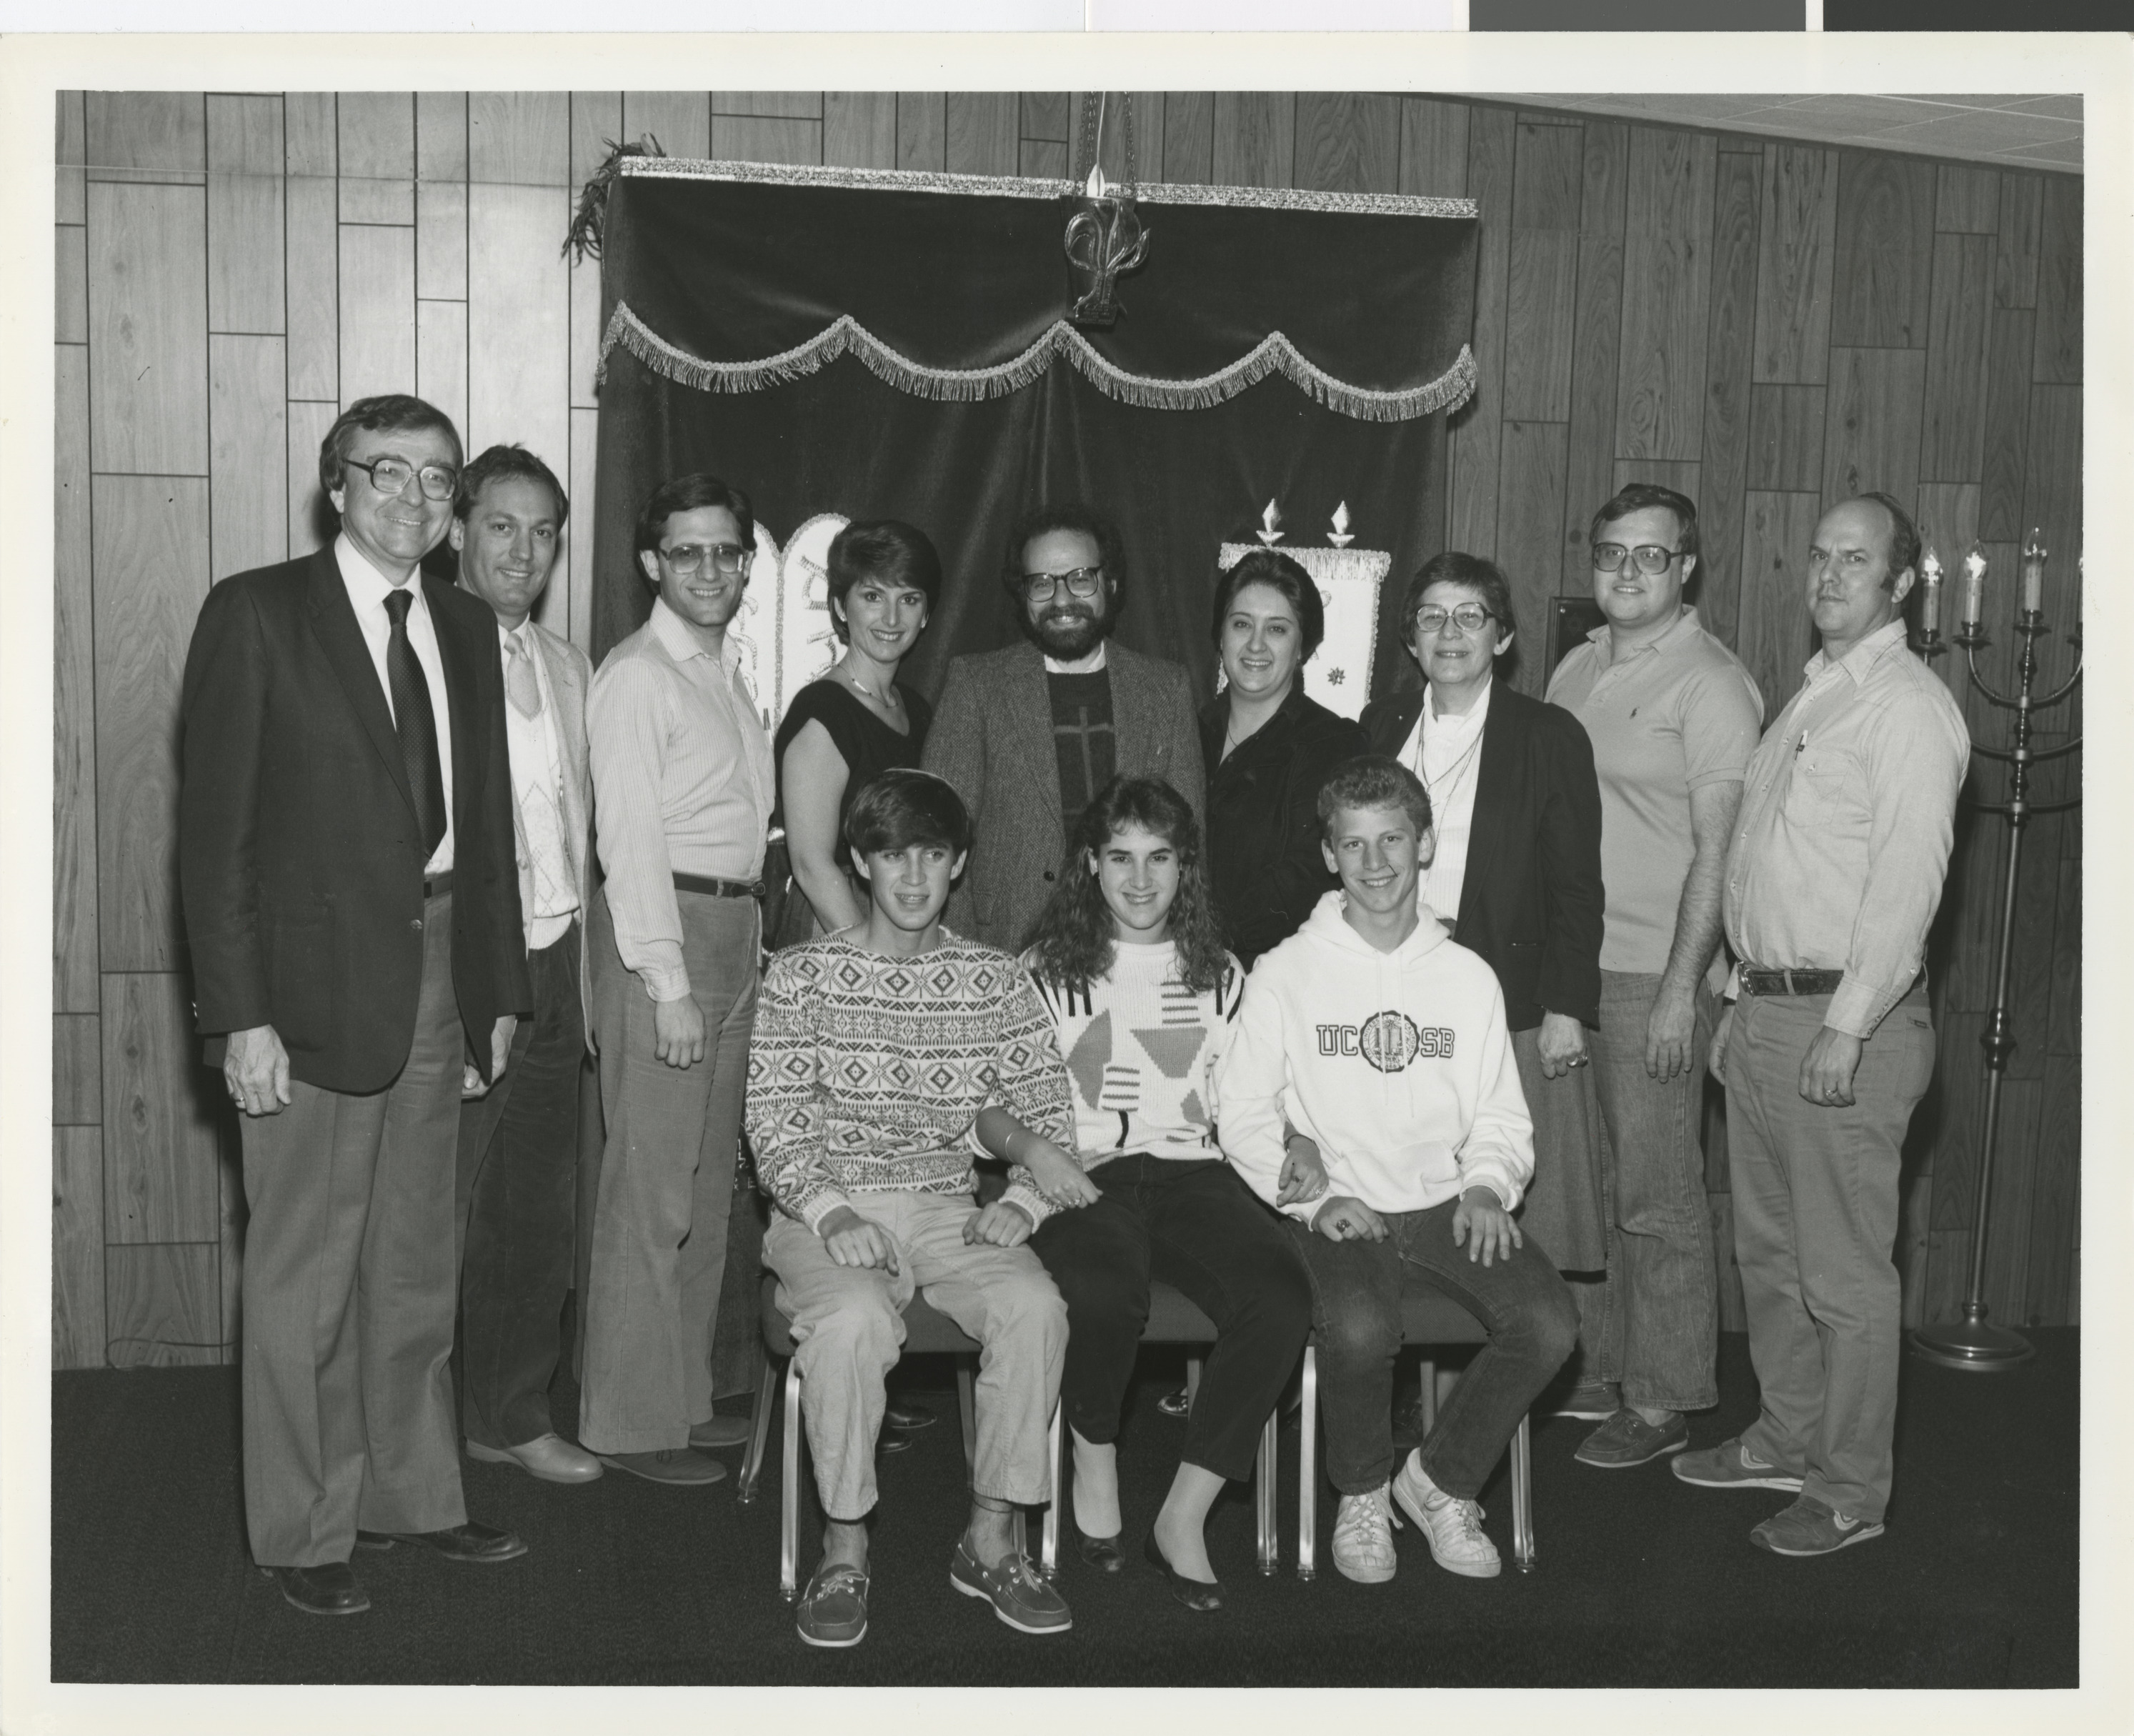 Photograph of U.S.Y. Kesher group, 1980s